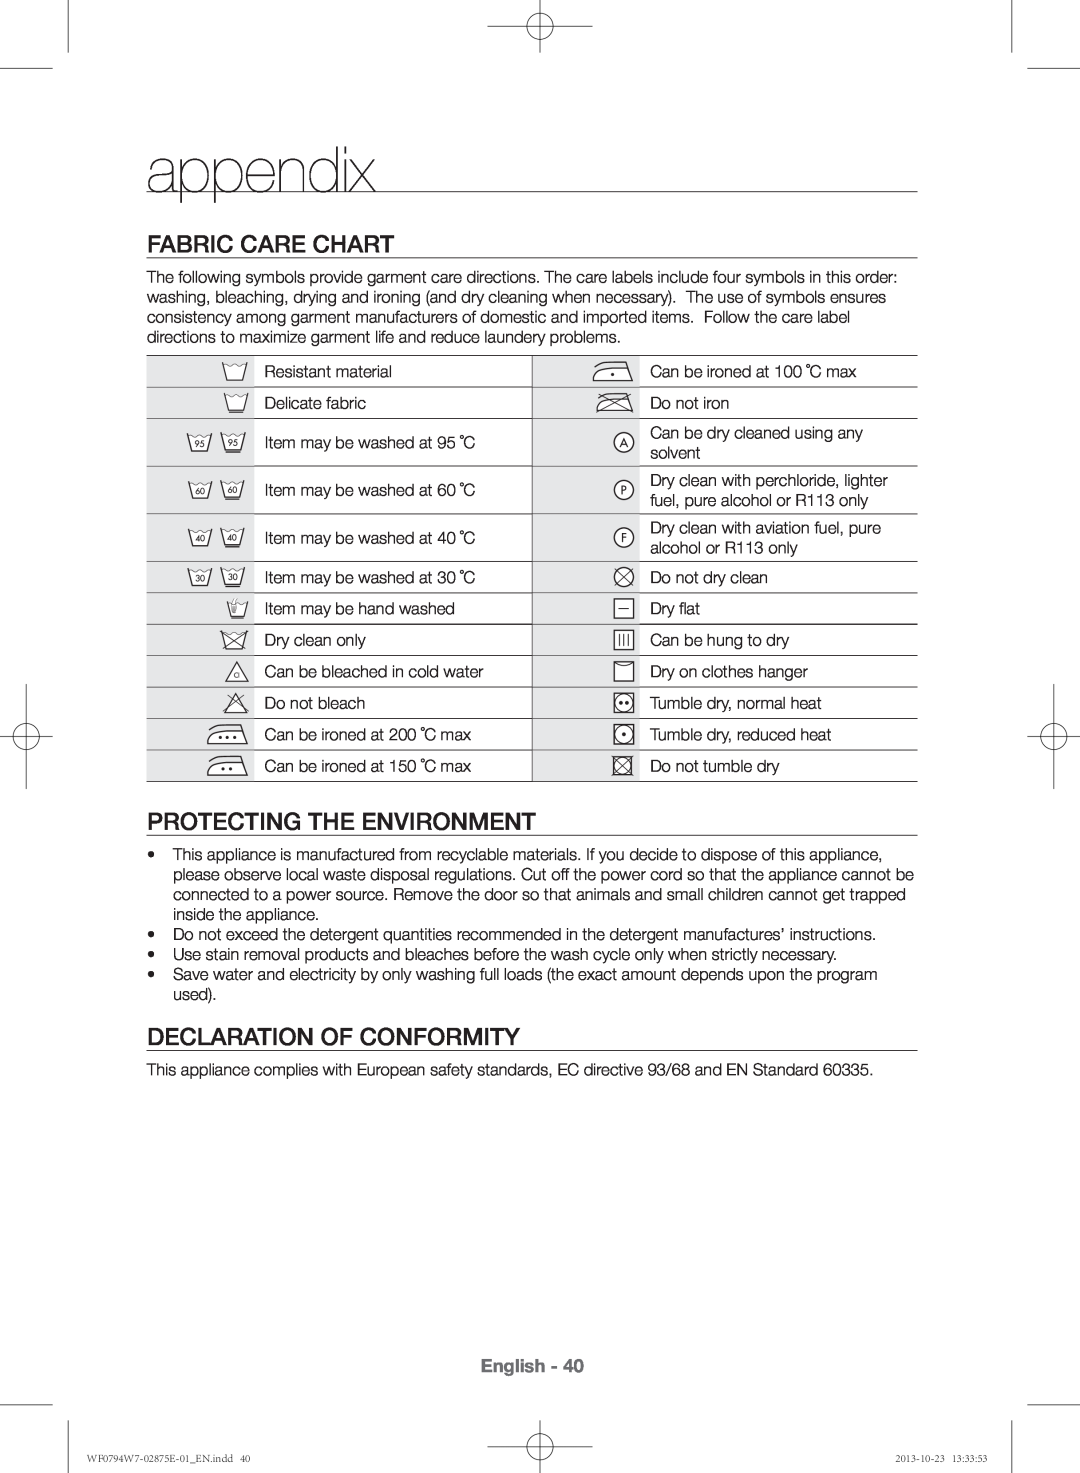 Samsung WF0794W7E9/XSV manual appendix, Fabric care chart, Protecting the environment, Declaration of conformity, English 